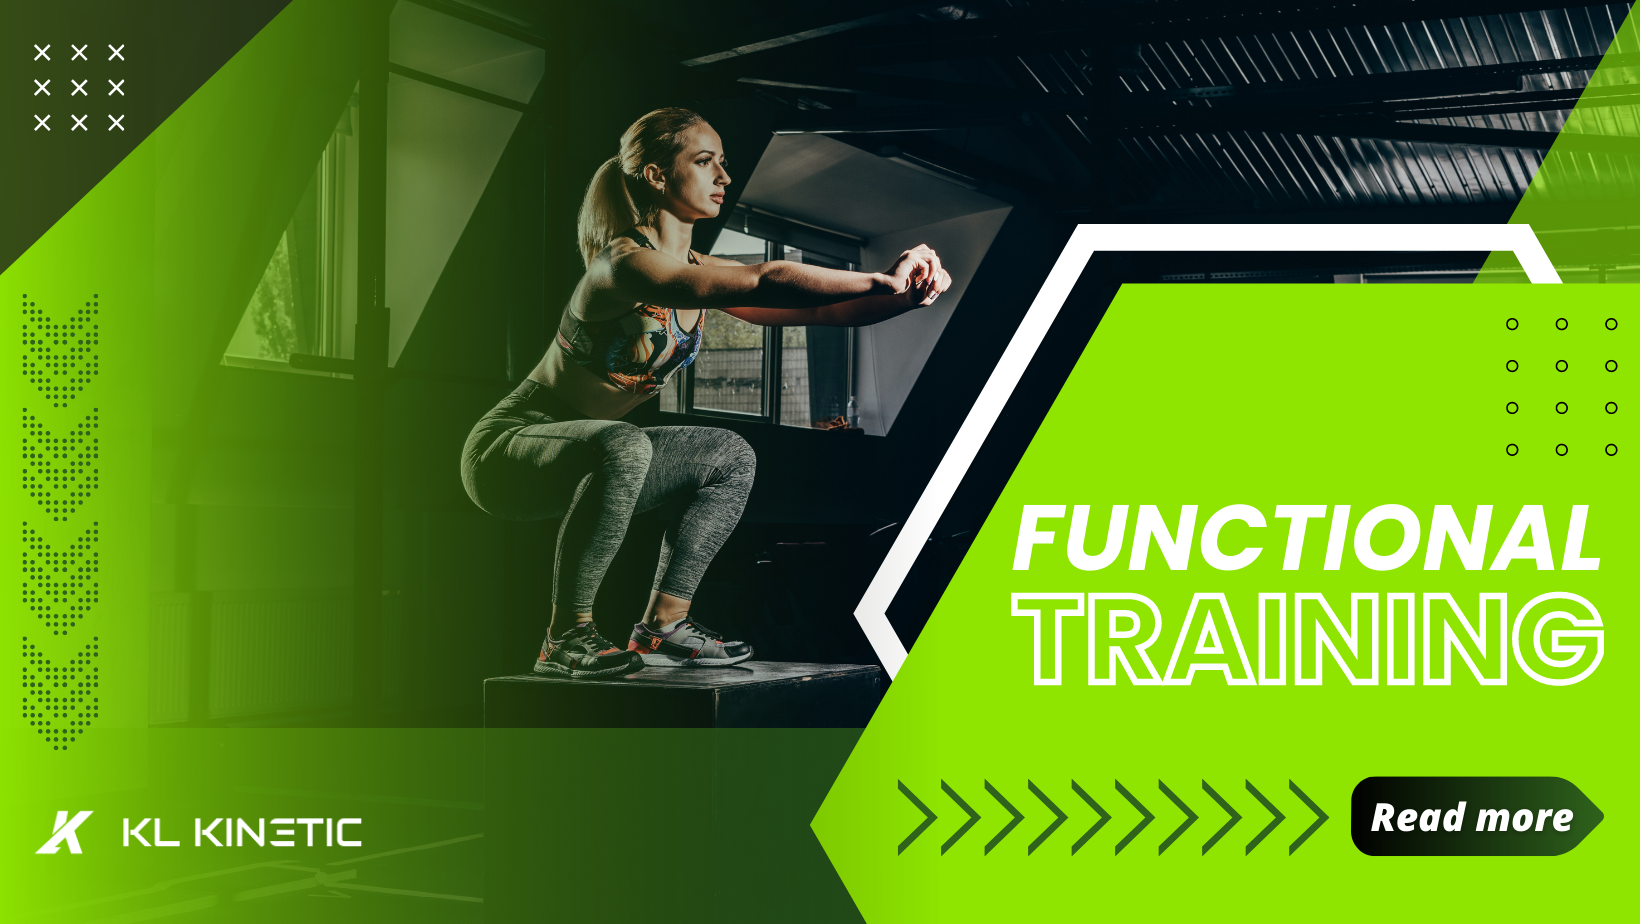 Functional training is simply about moving